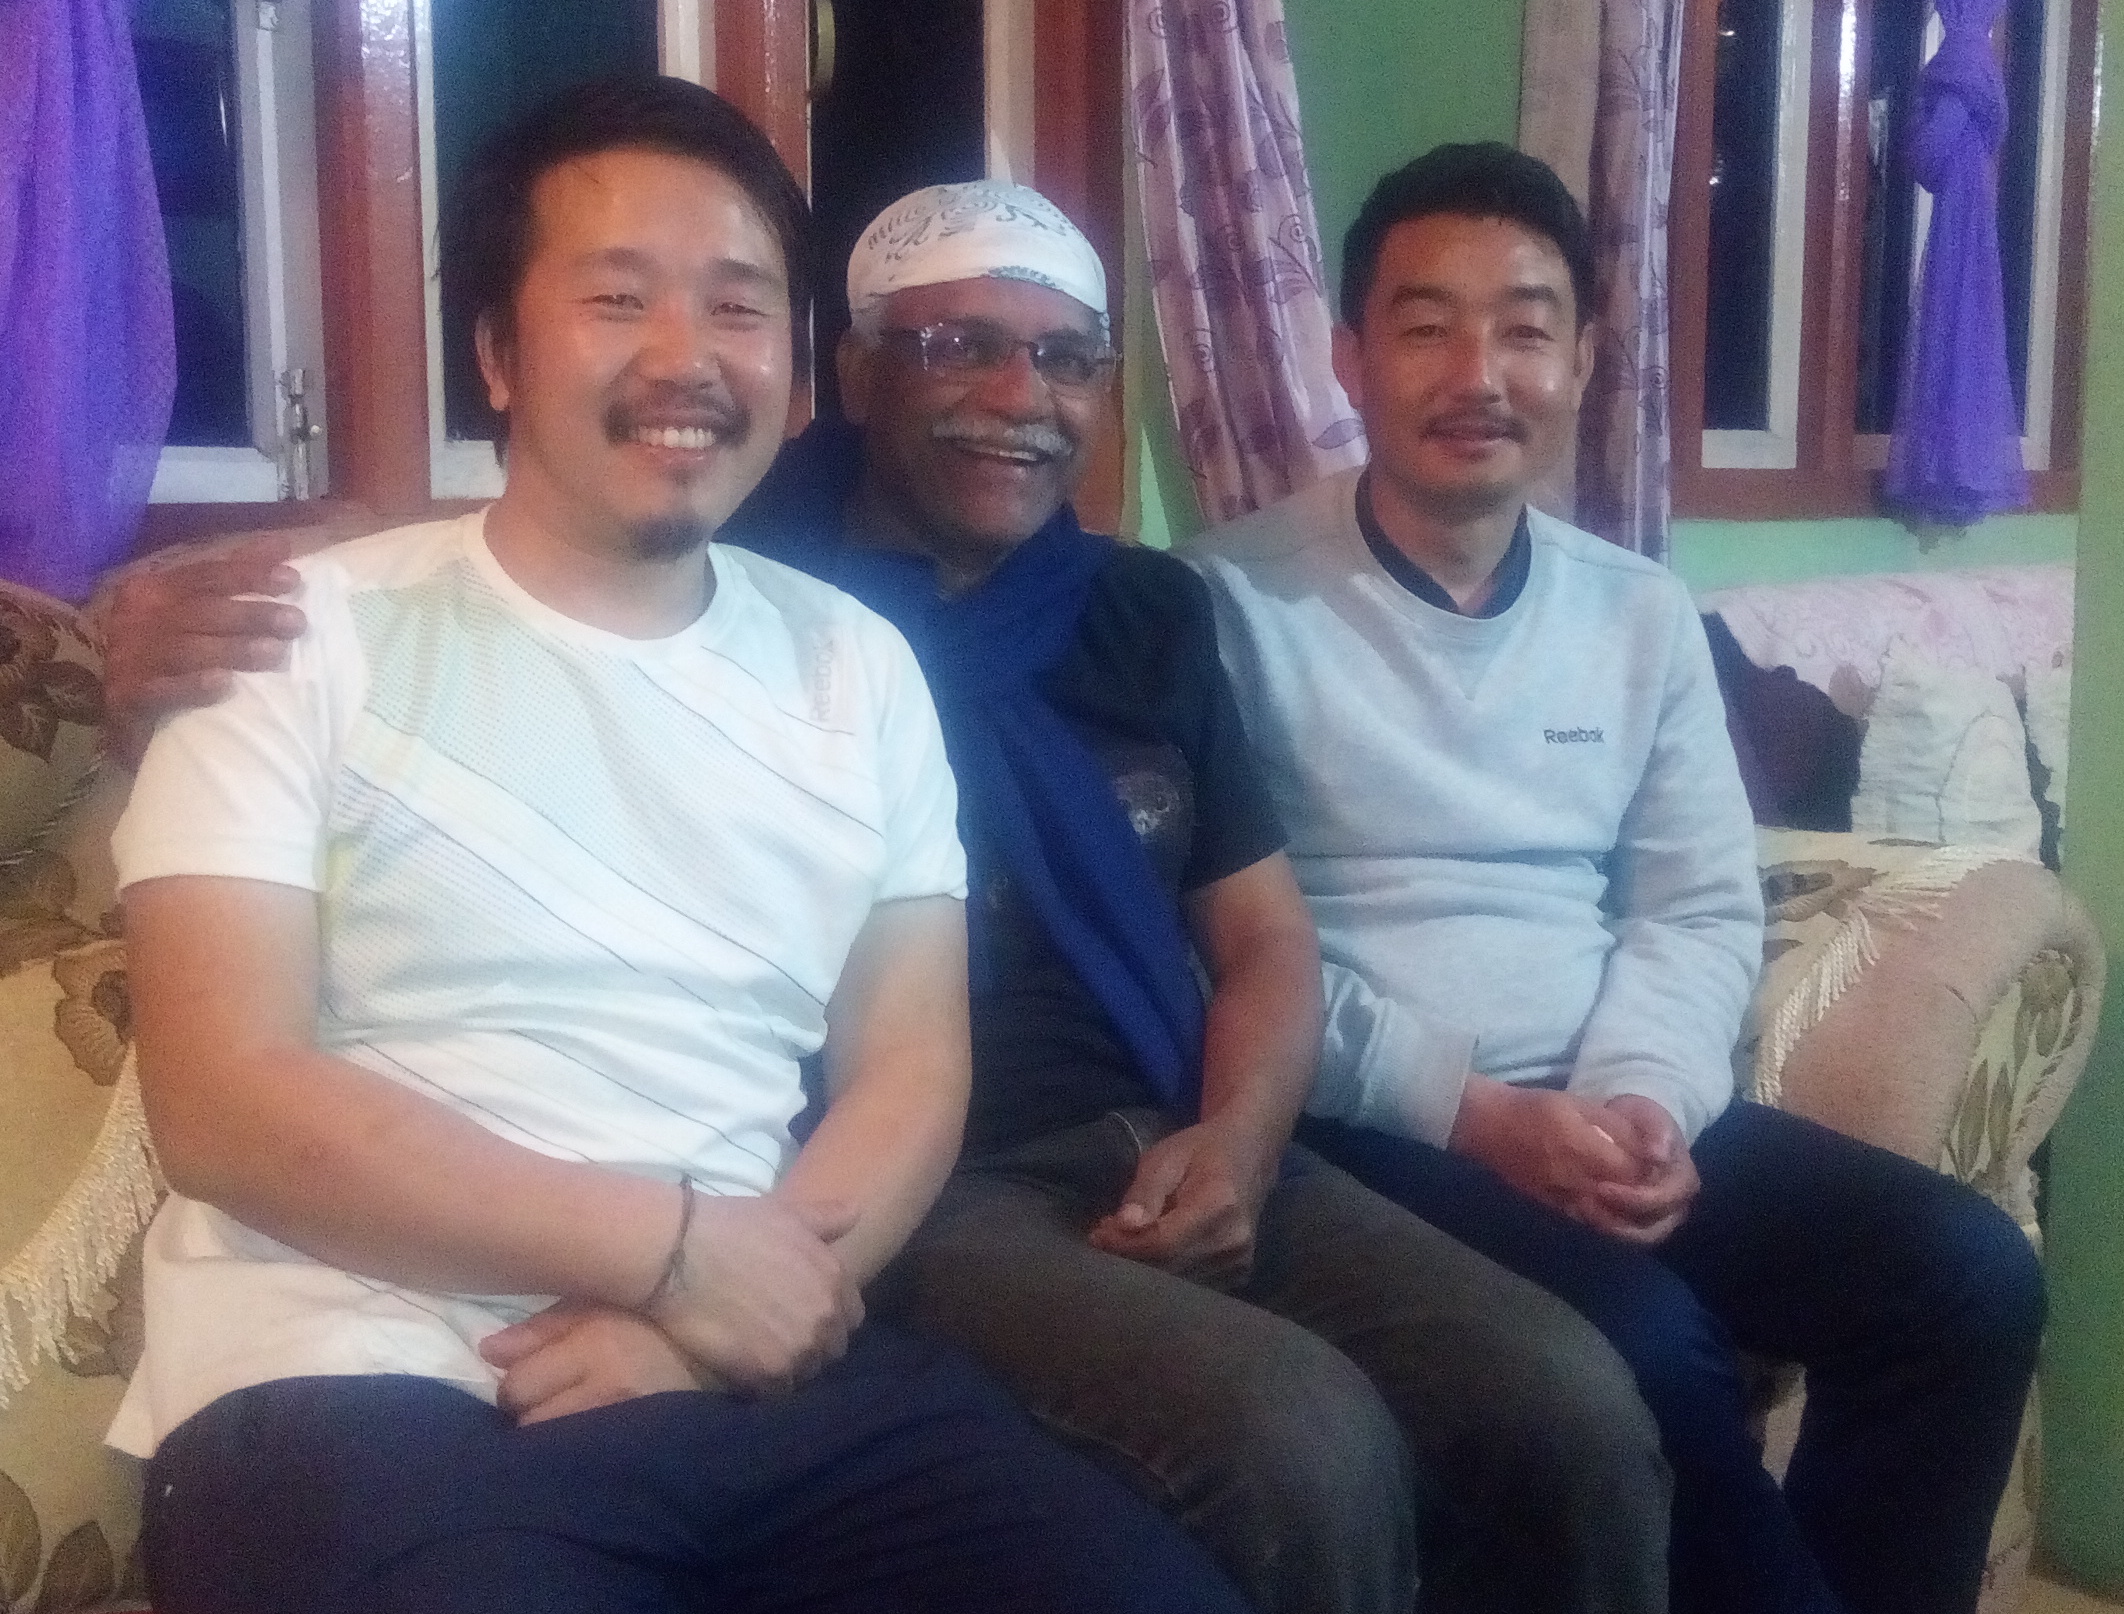 Gyaatso (left) and Ugen (right) with author K. J. Joy at Ugen's home.